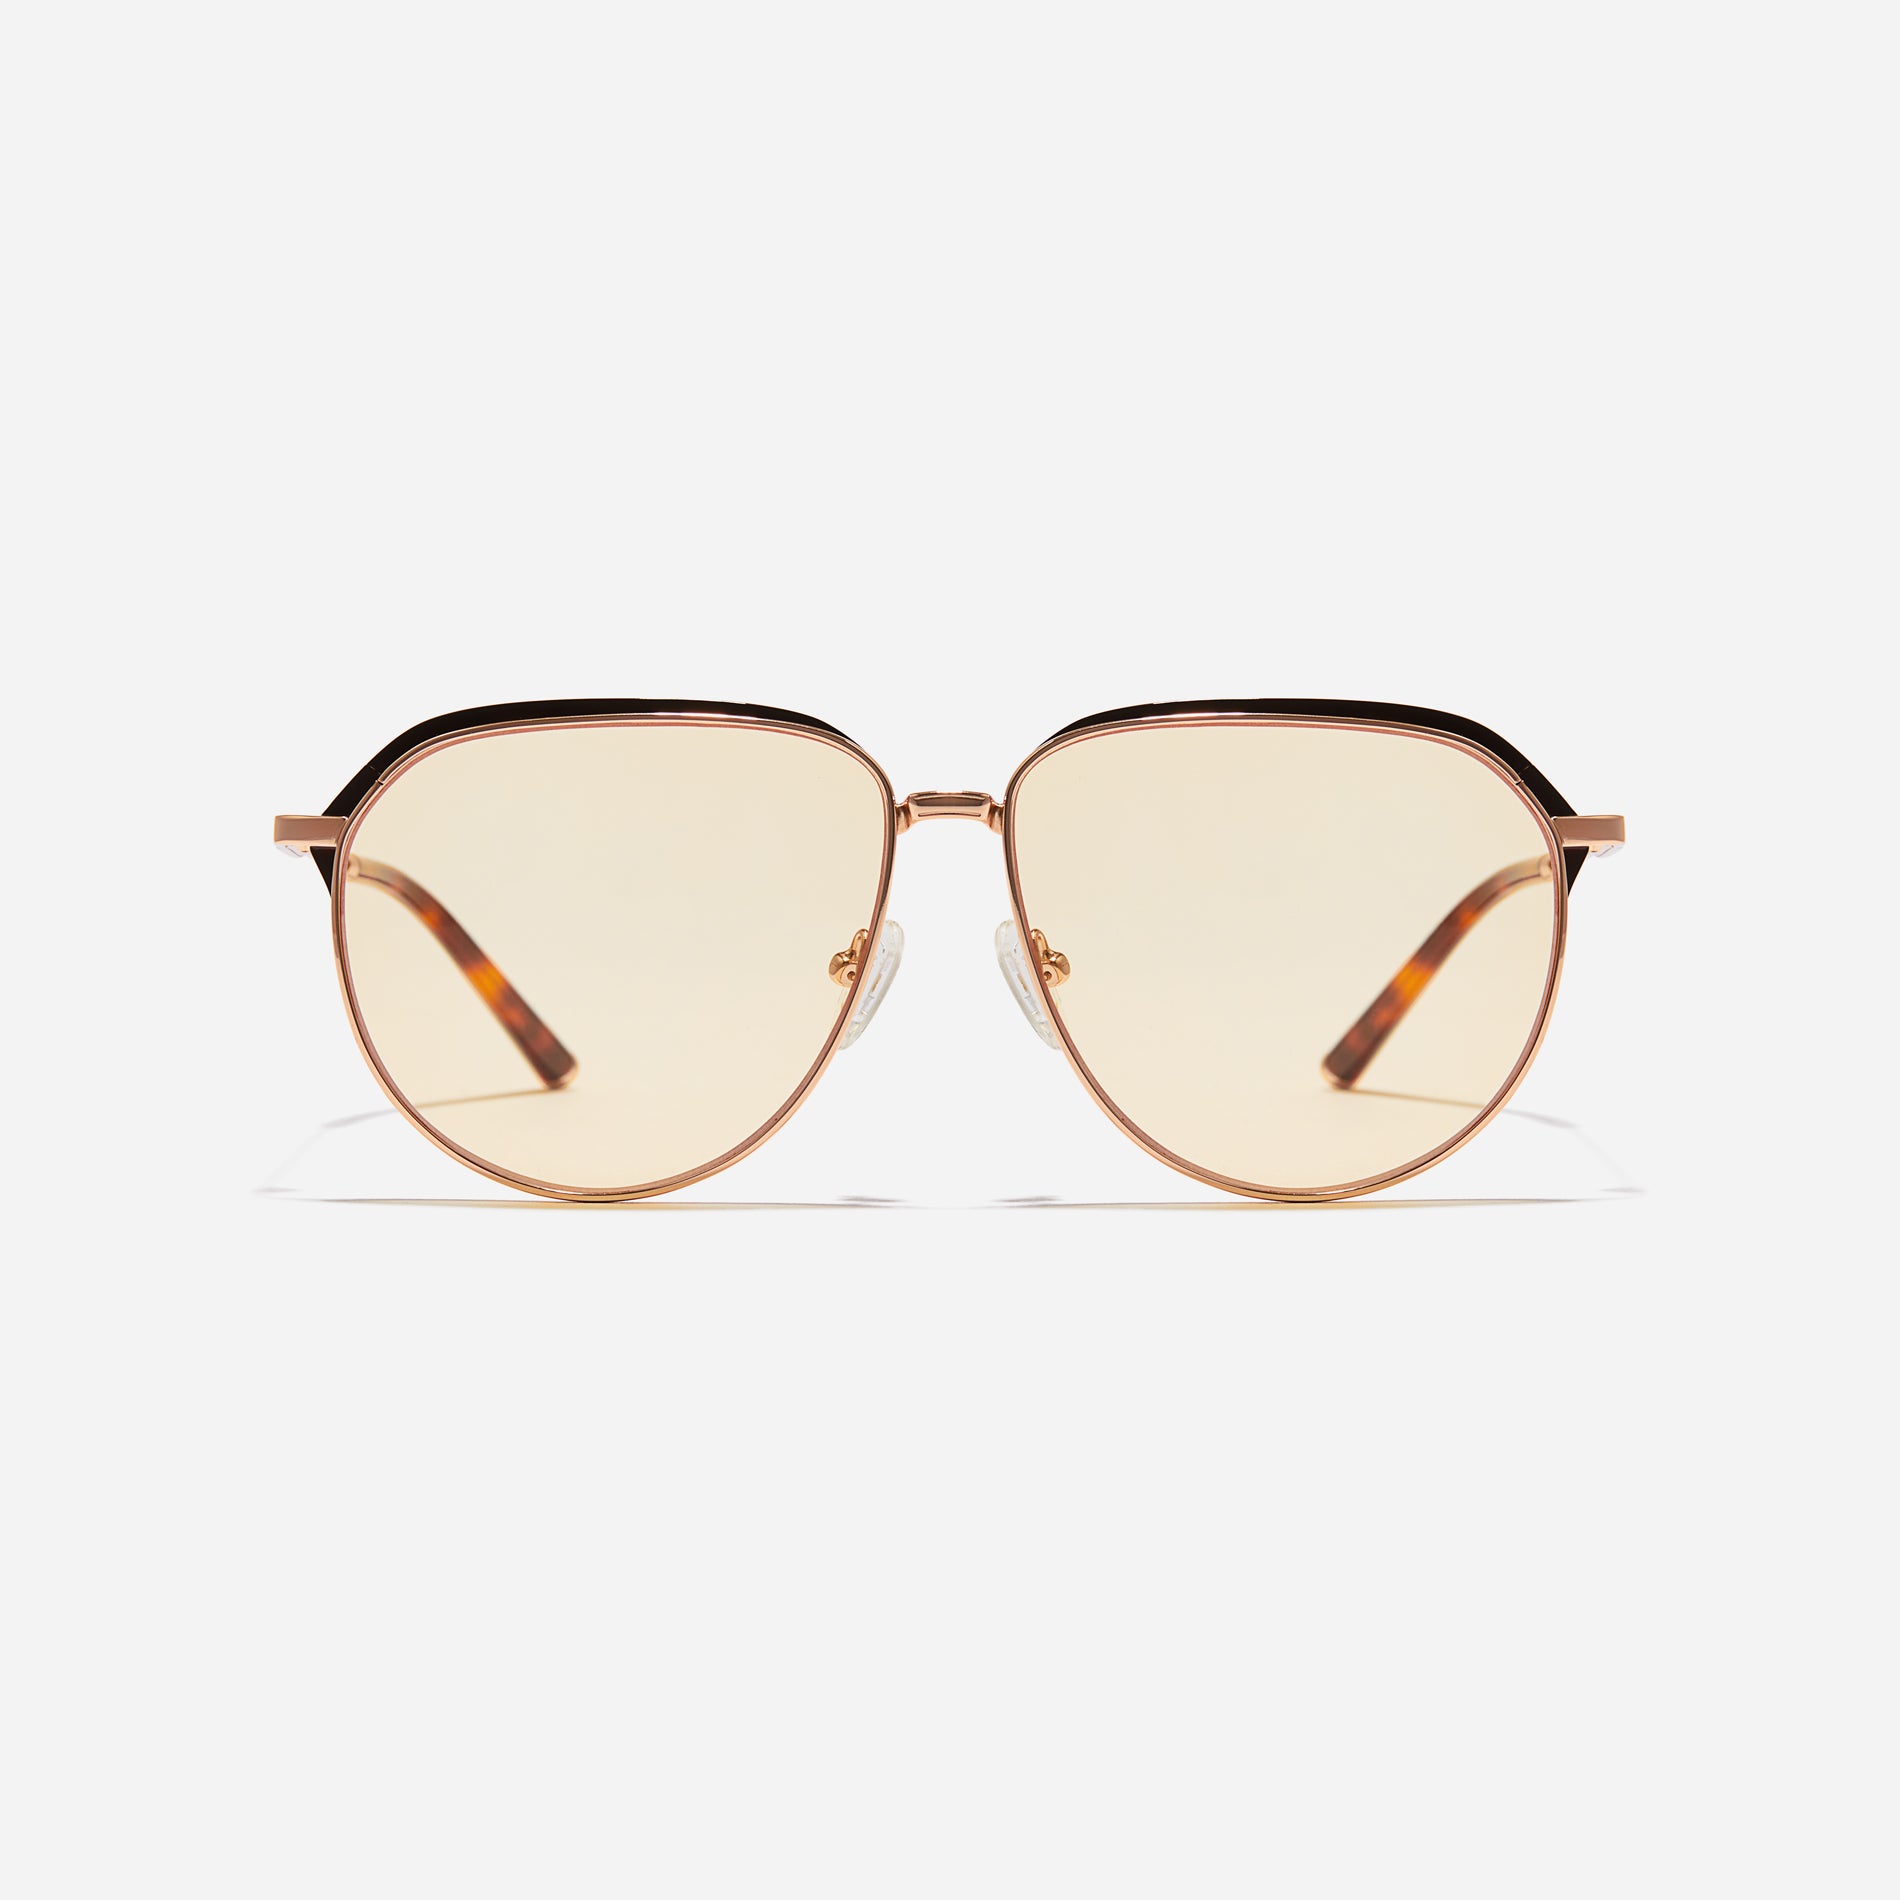 Oversized aviator sunglasses that embody a bold, free-spirited trend. Their sleek temples with subtle detailing elevate their chic and stylish vibe.